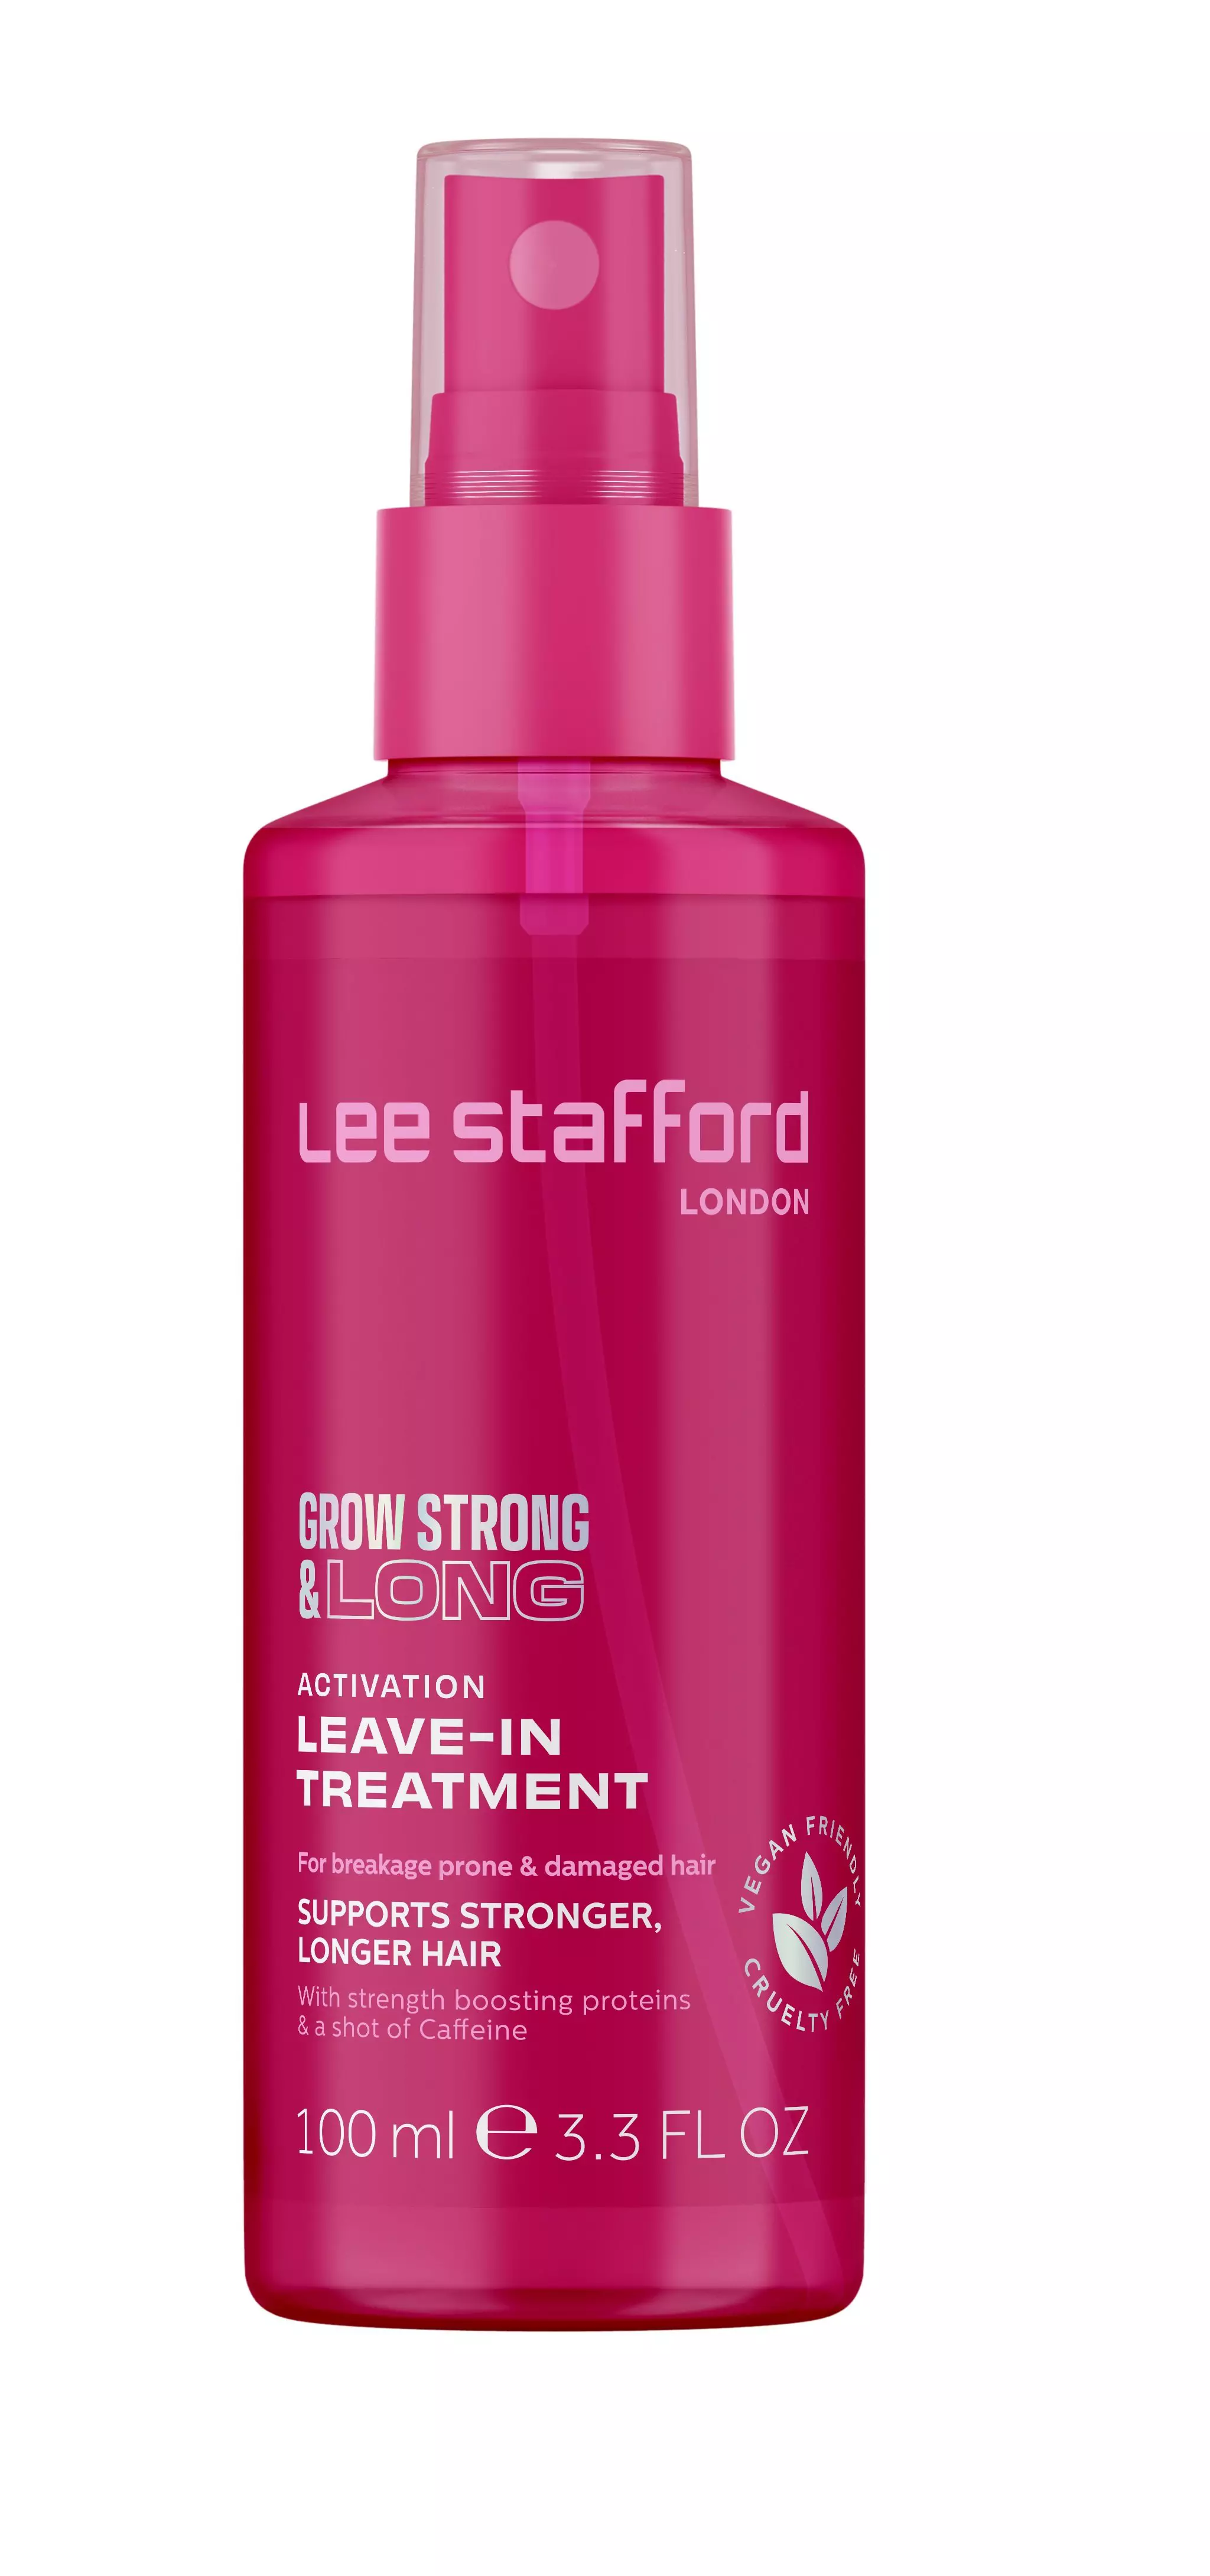 Lee Stafford Grow Stronglong Activation Leave-In